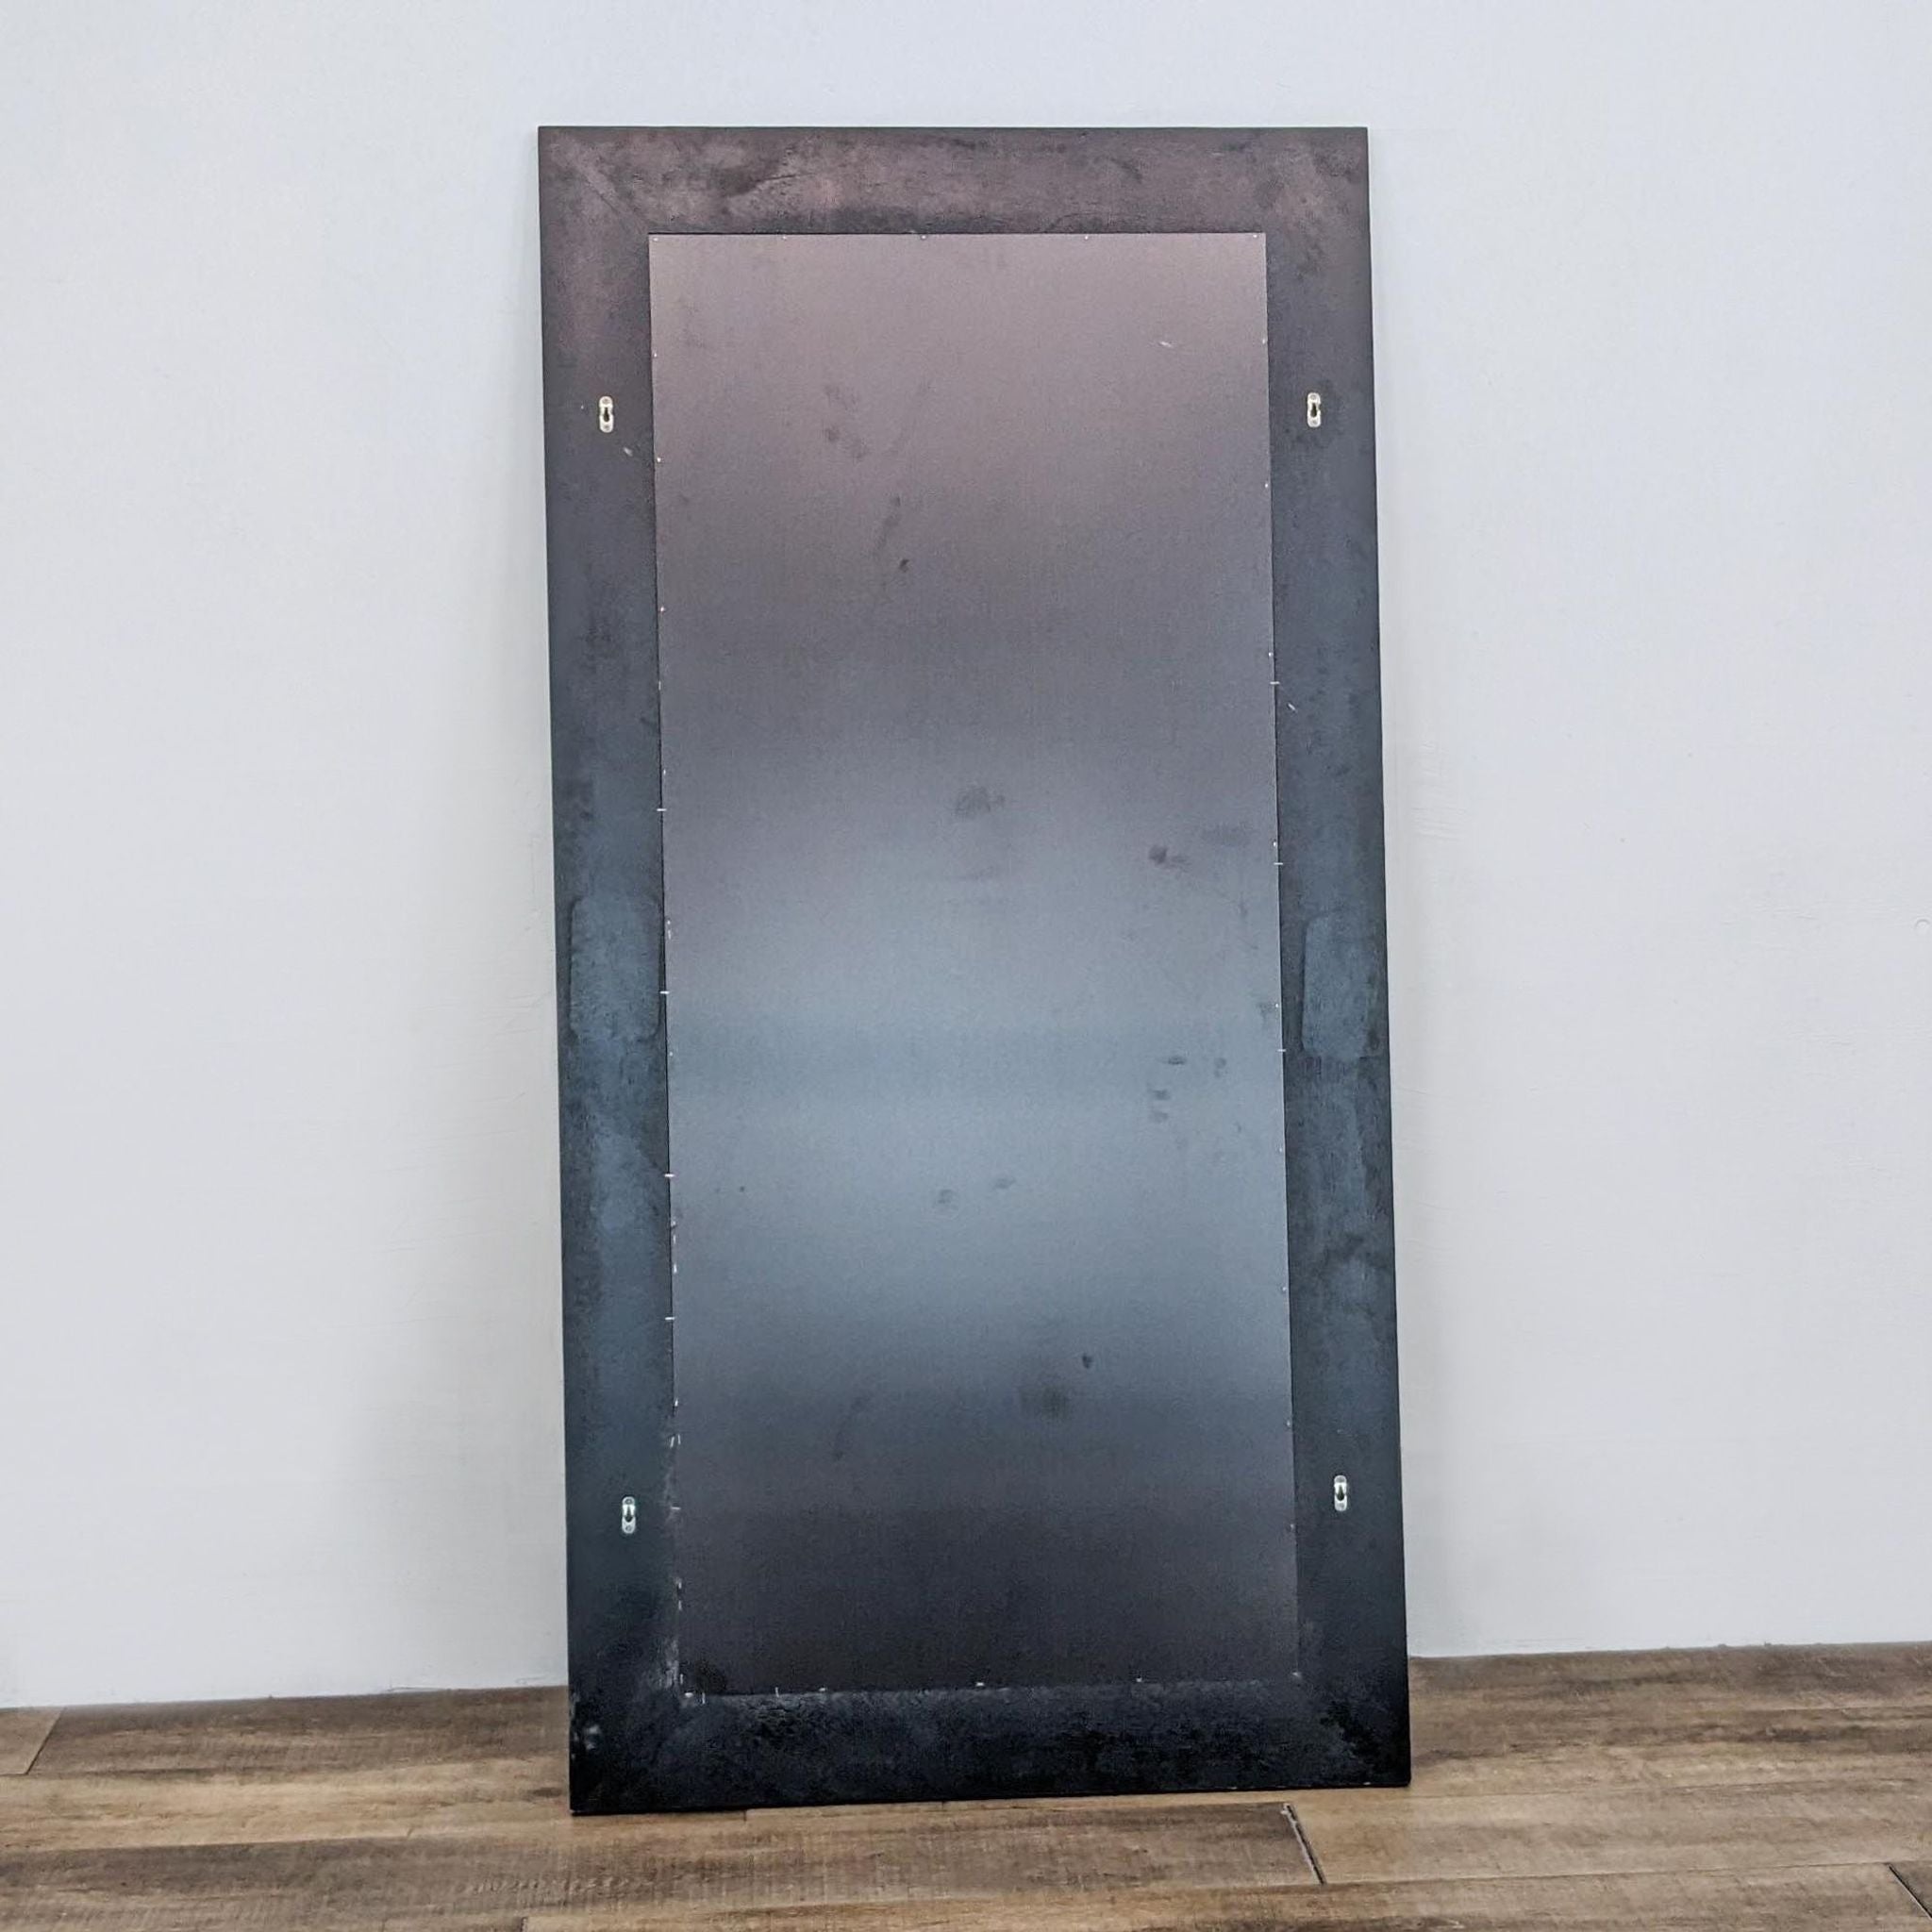 Modern Reperch mirror featuring black frame, installed in a room, close-up of sturdy frame detail visible.